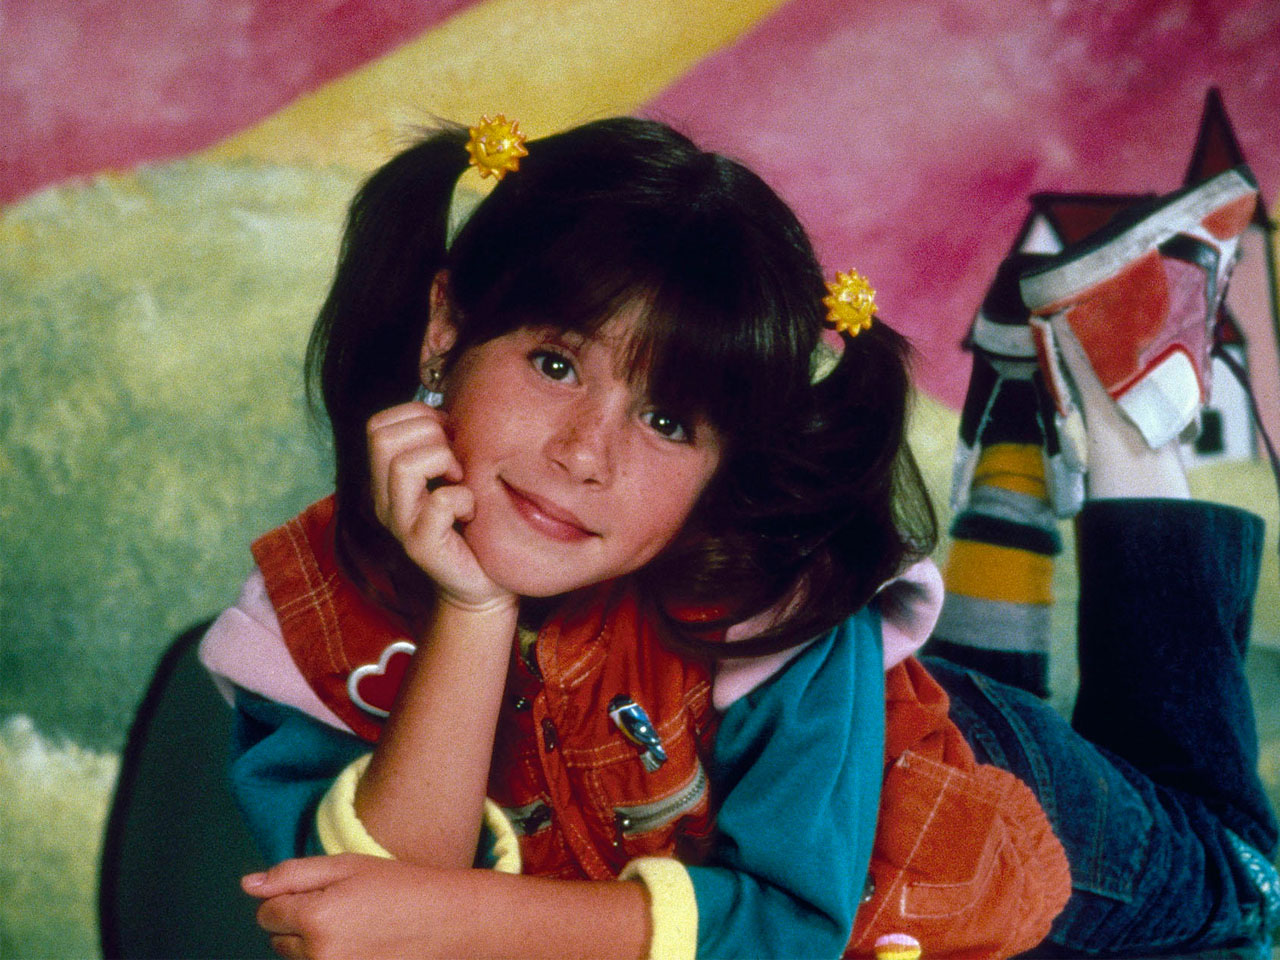 Punky Brewster sequel series in the works.